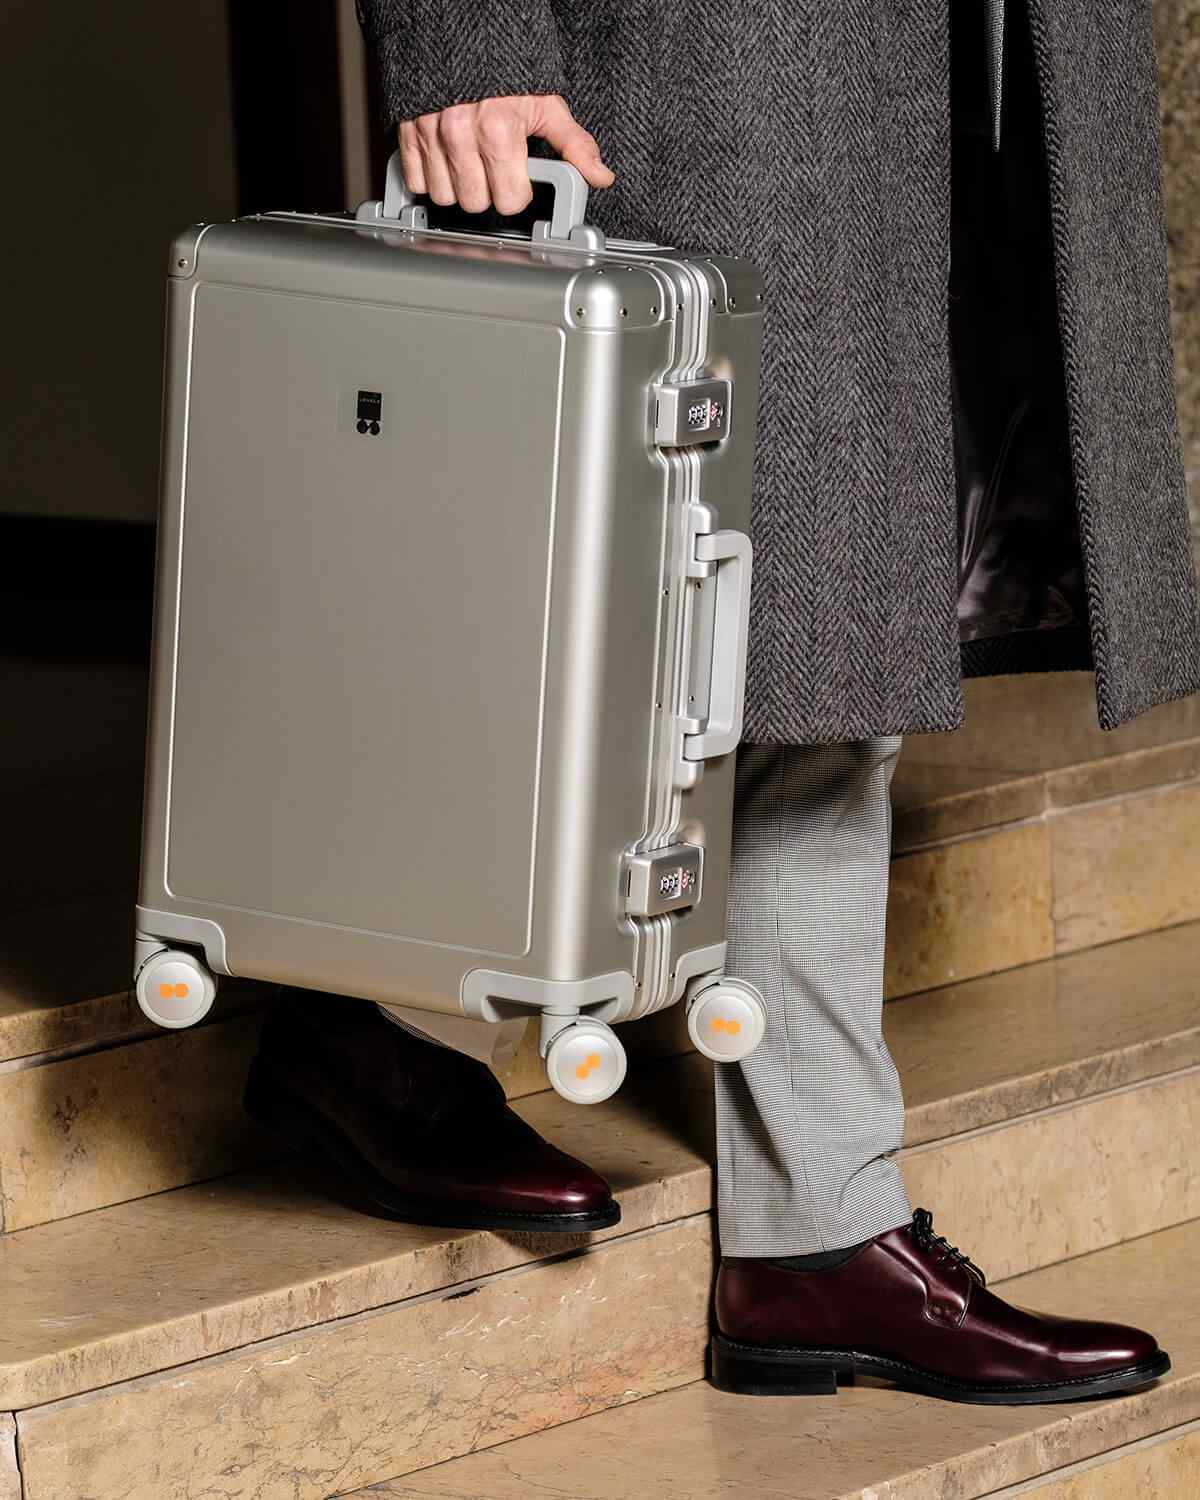 Aluminium Carry-on suitcase from Level8